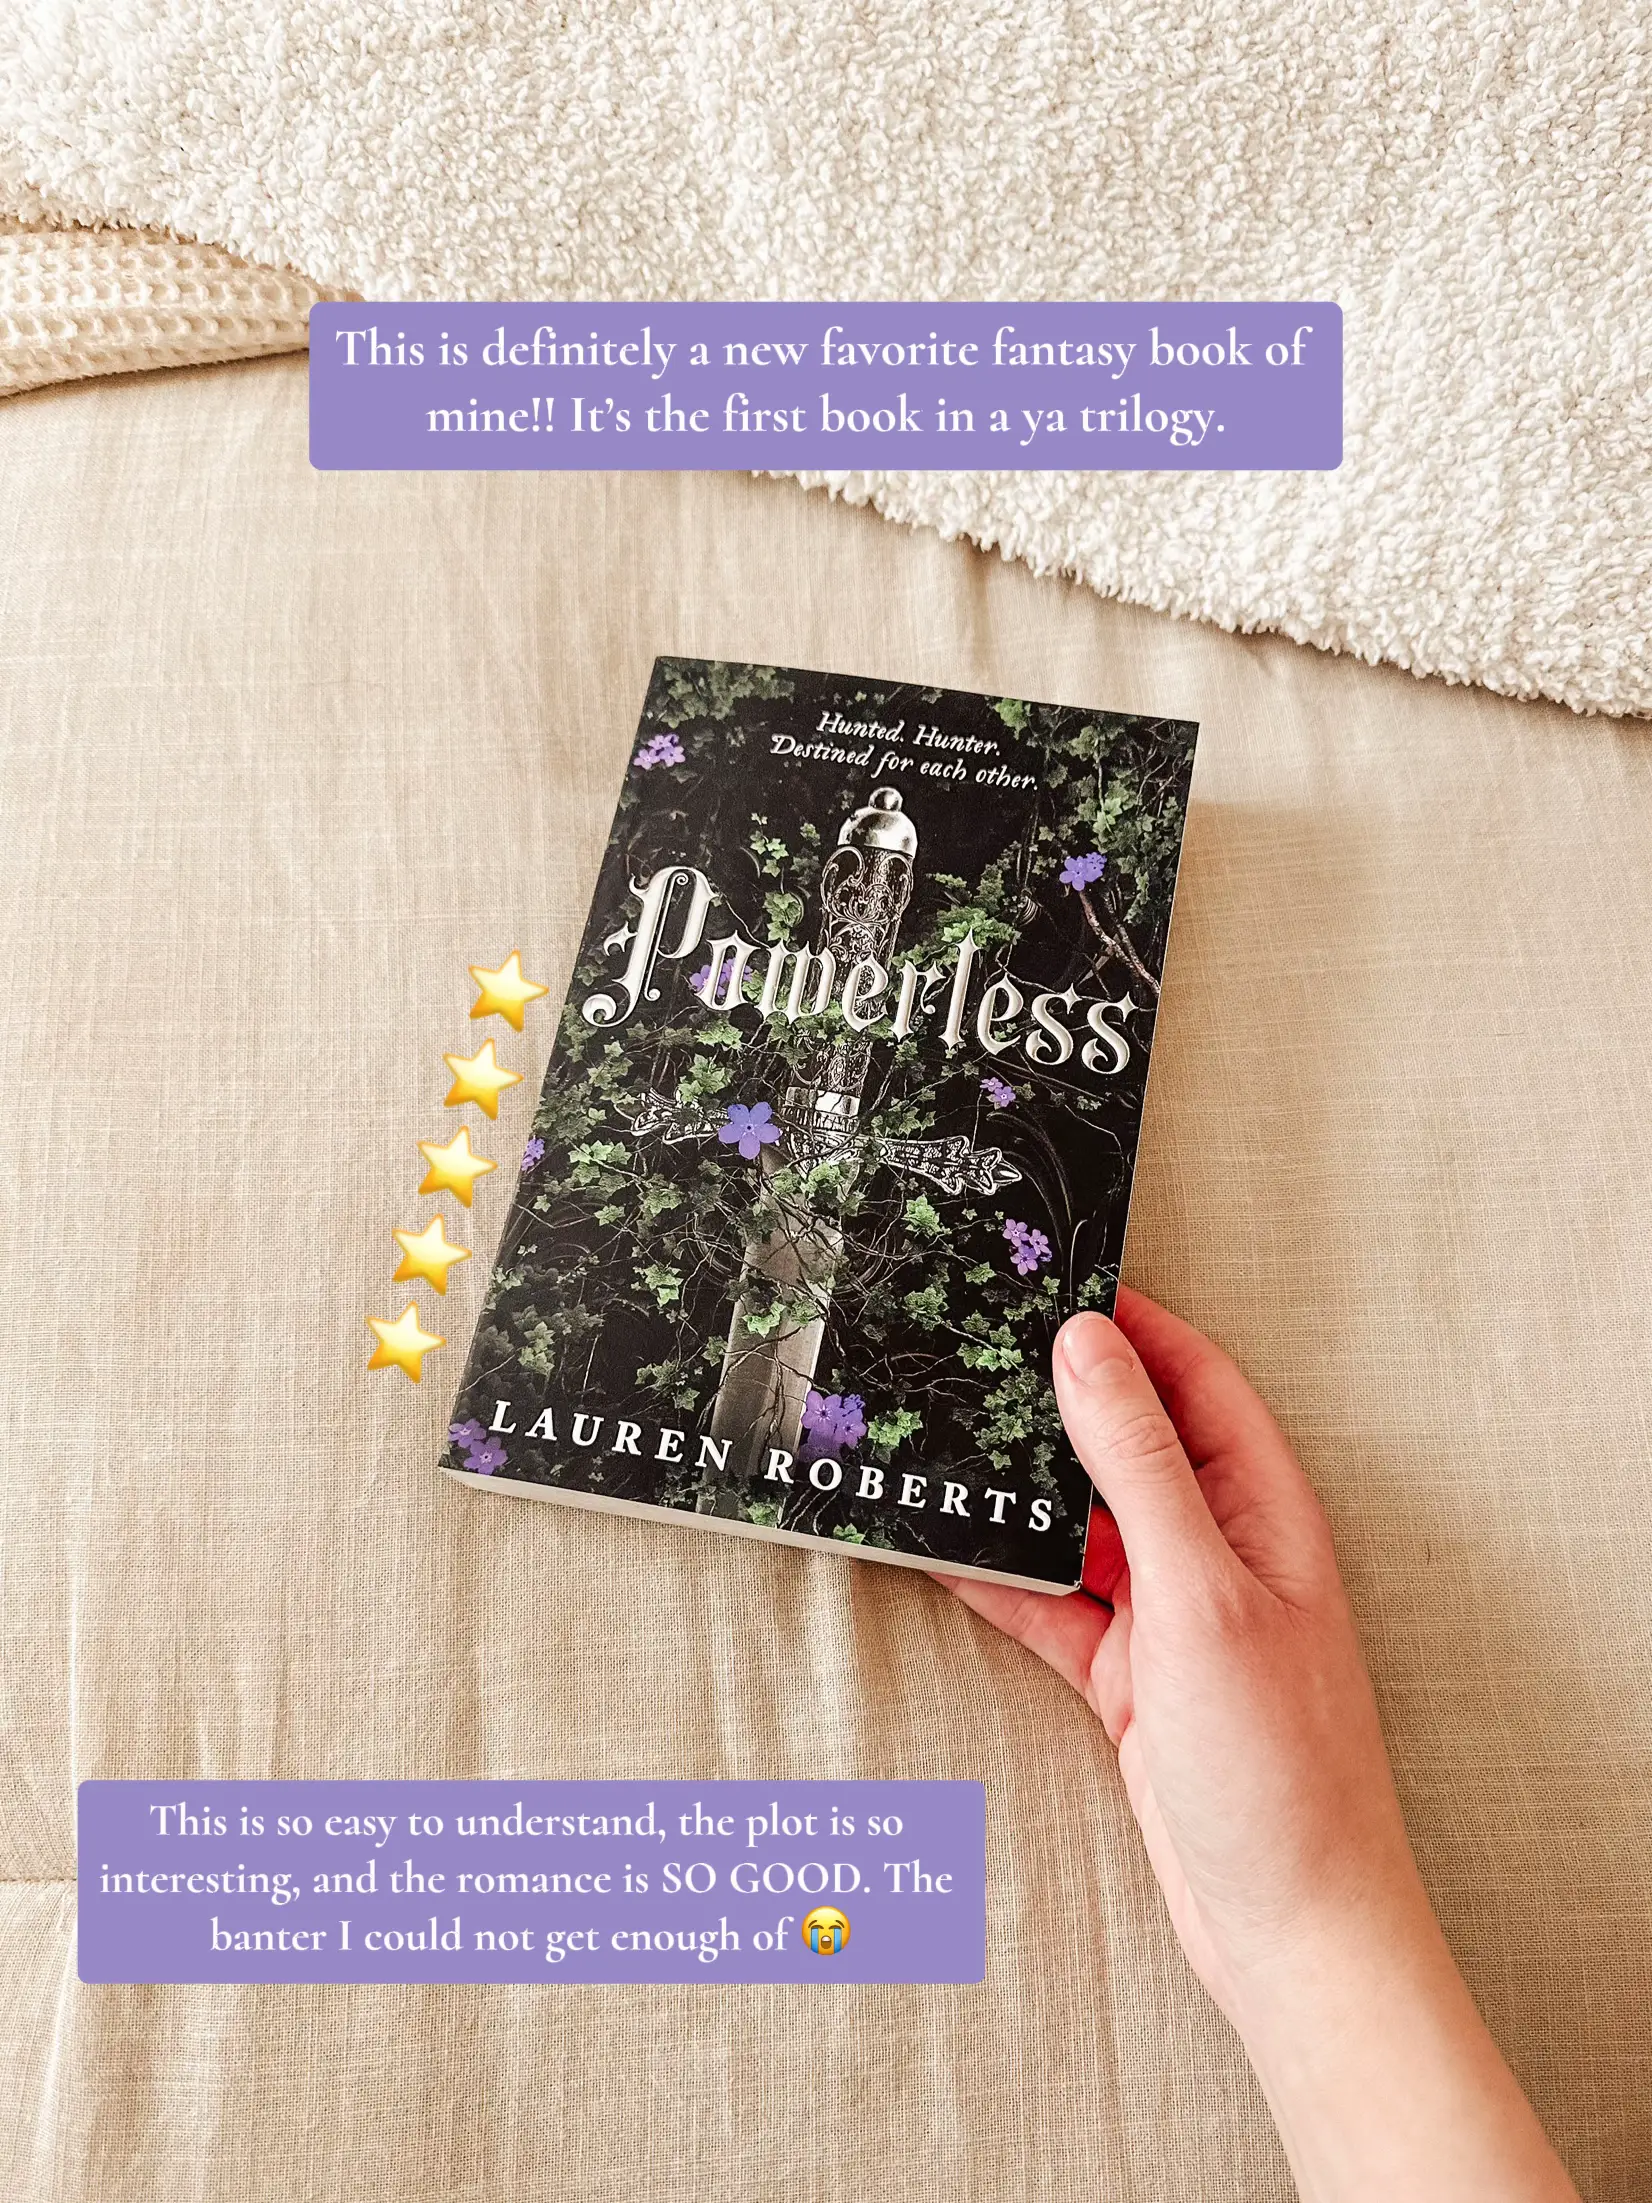 Reckless - (the Powerless Trilogy) By Lauren Roberts (hardcover) : Target